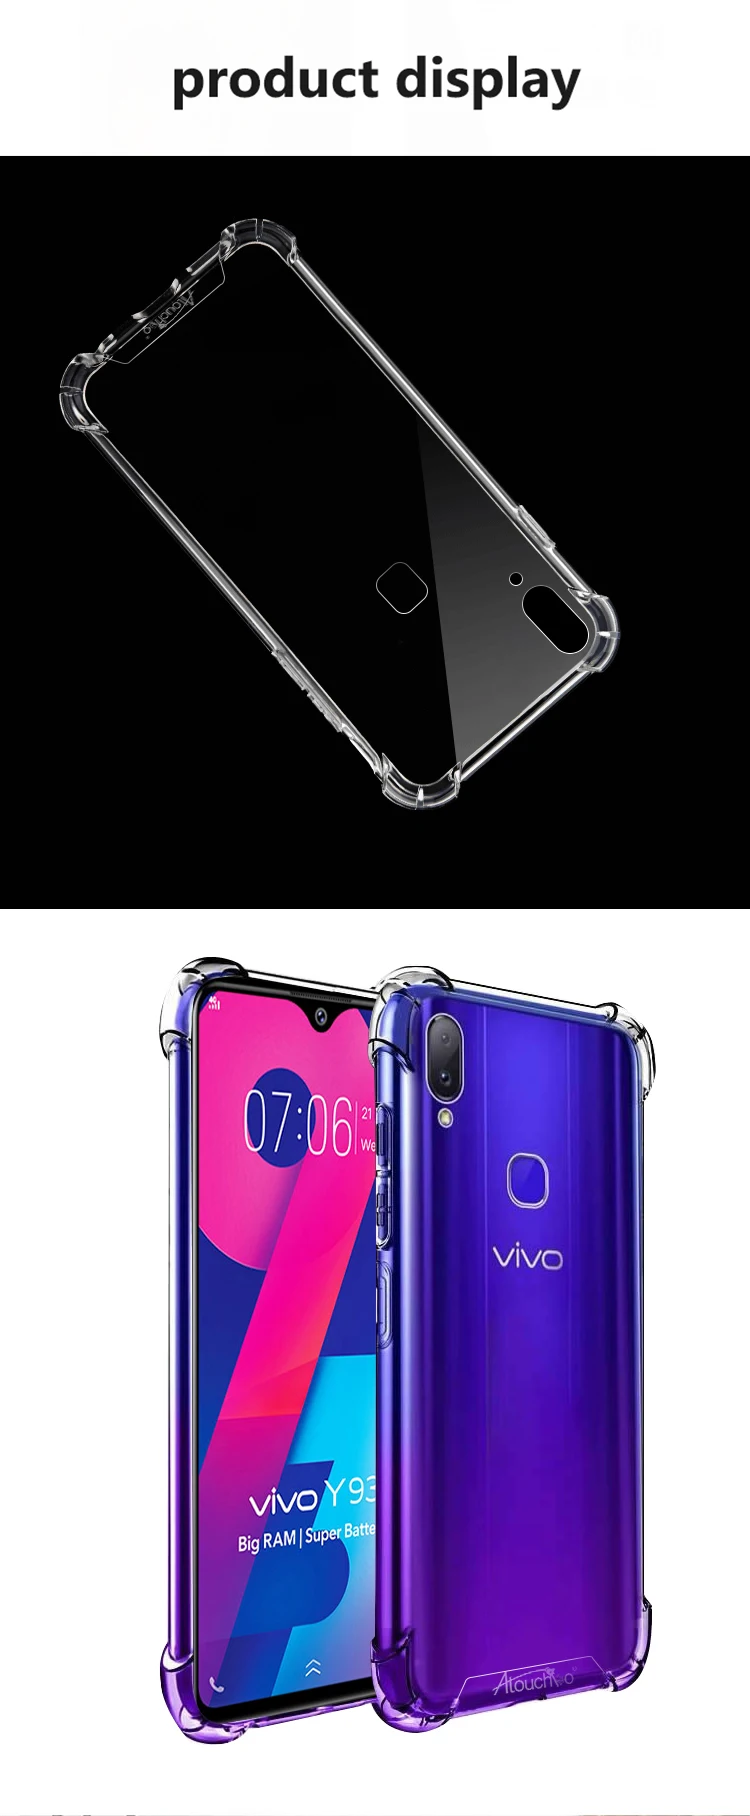 Transparent PC TPU phone case back cover for Vivo Y93 phone case